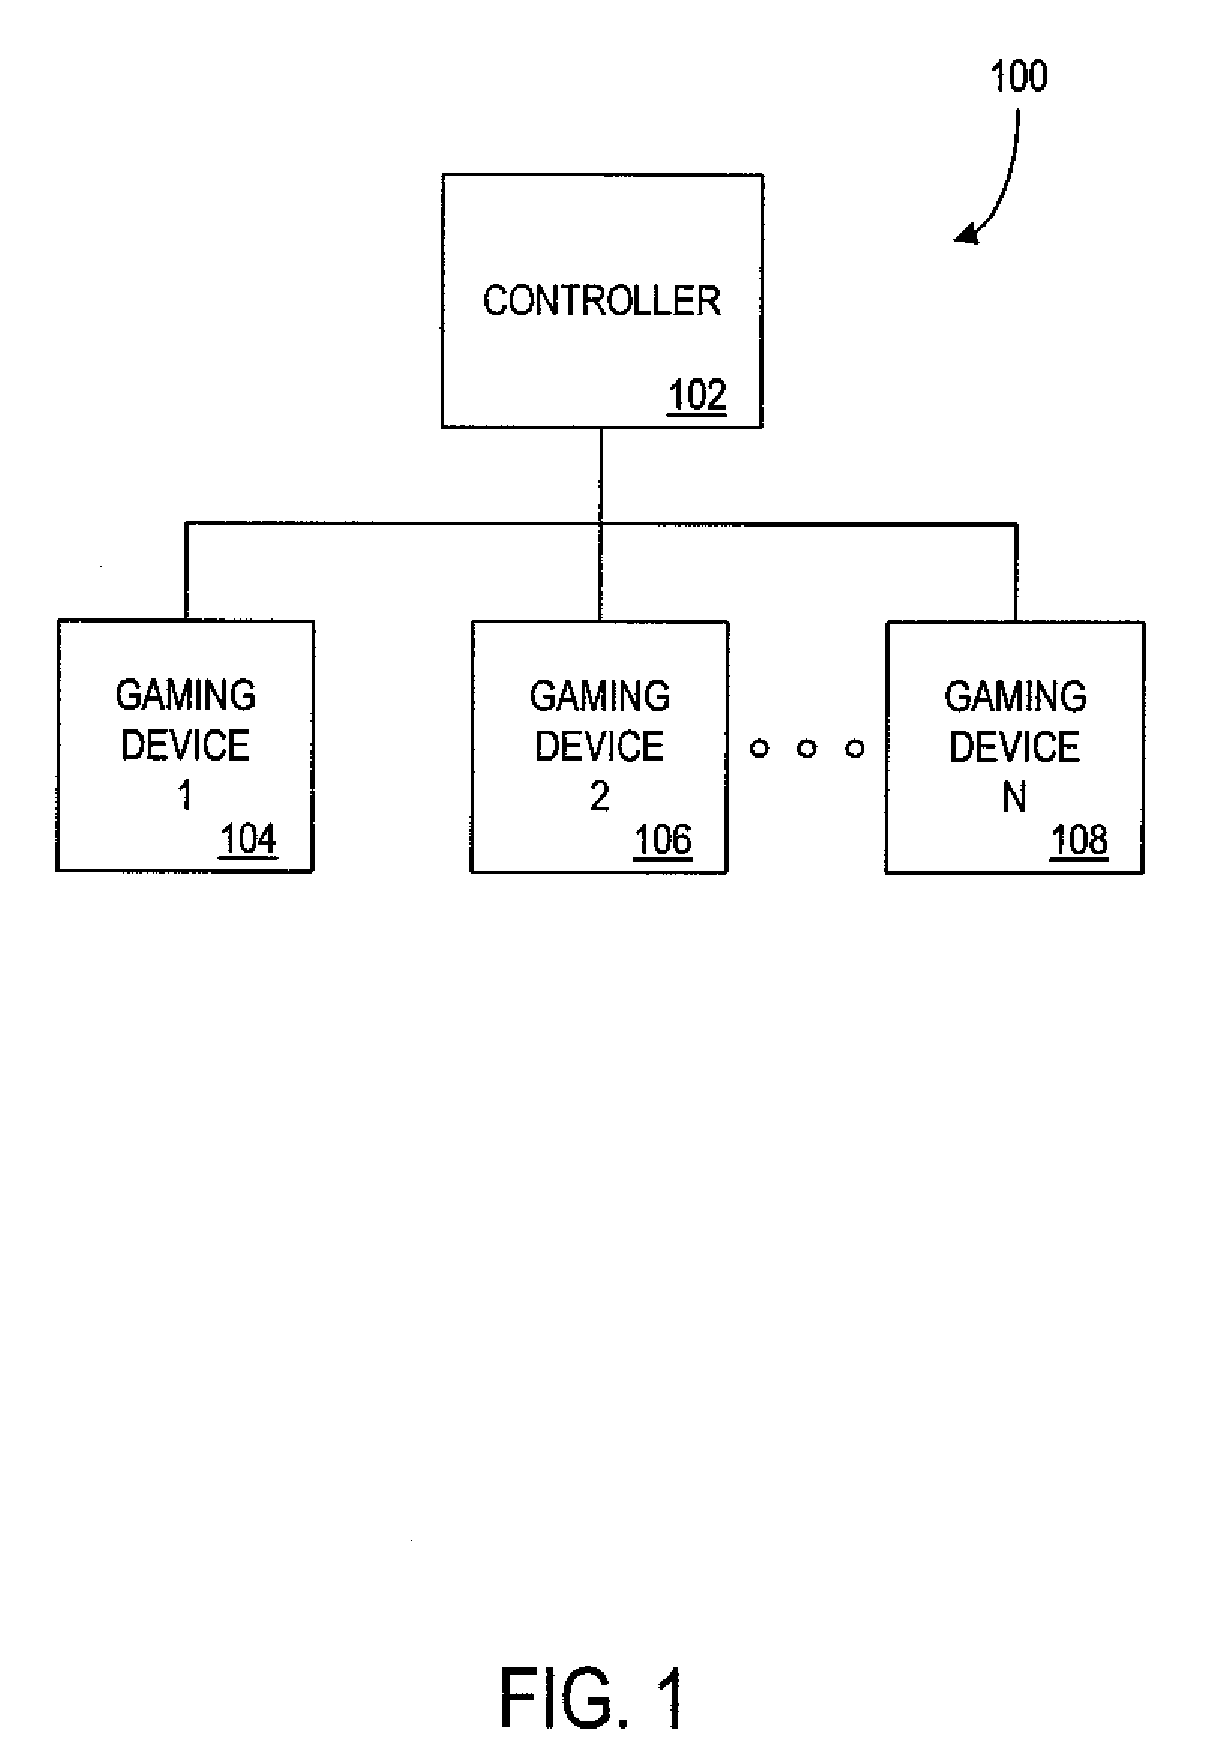 Multiplayer gaming device and methods